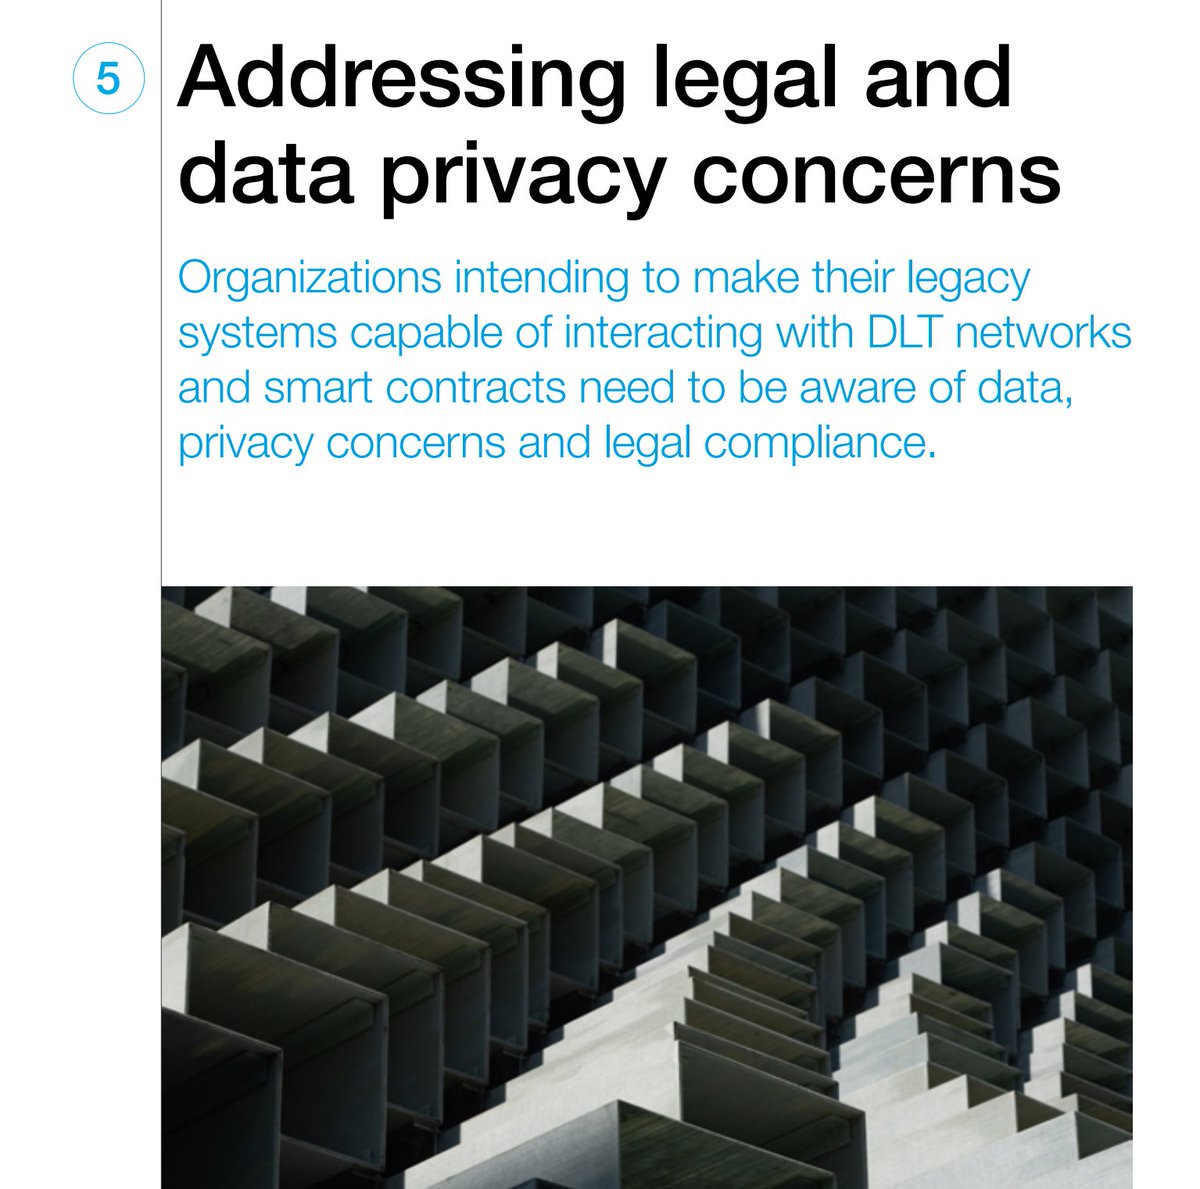 Now onto addressing the elephant in the room, legal and data privacy concerns from enterprisesThis includes - GDPR implications (EU regulations)- Data privacy- Legal liability (Btw anyone else notice all the hexagons throughout this paper?)